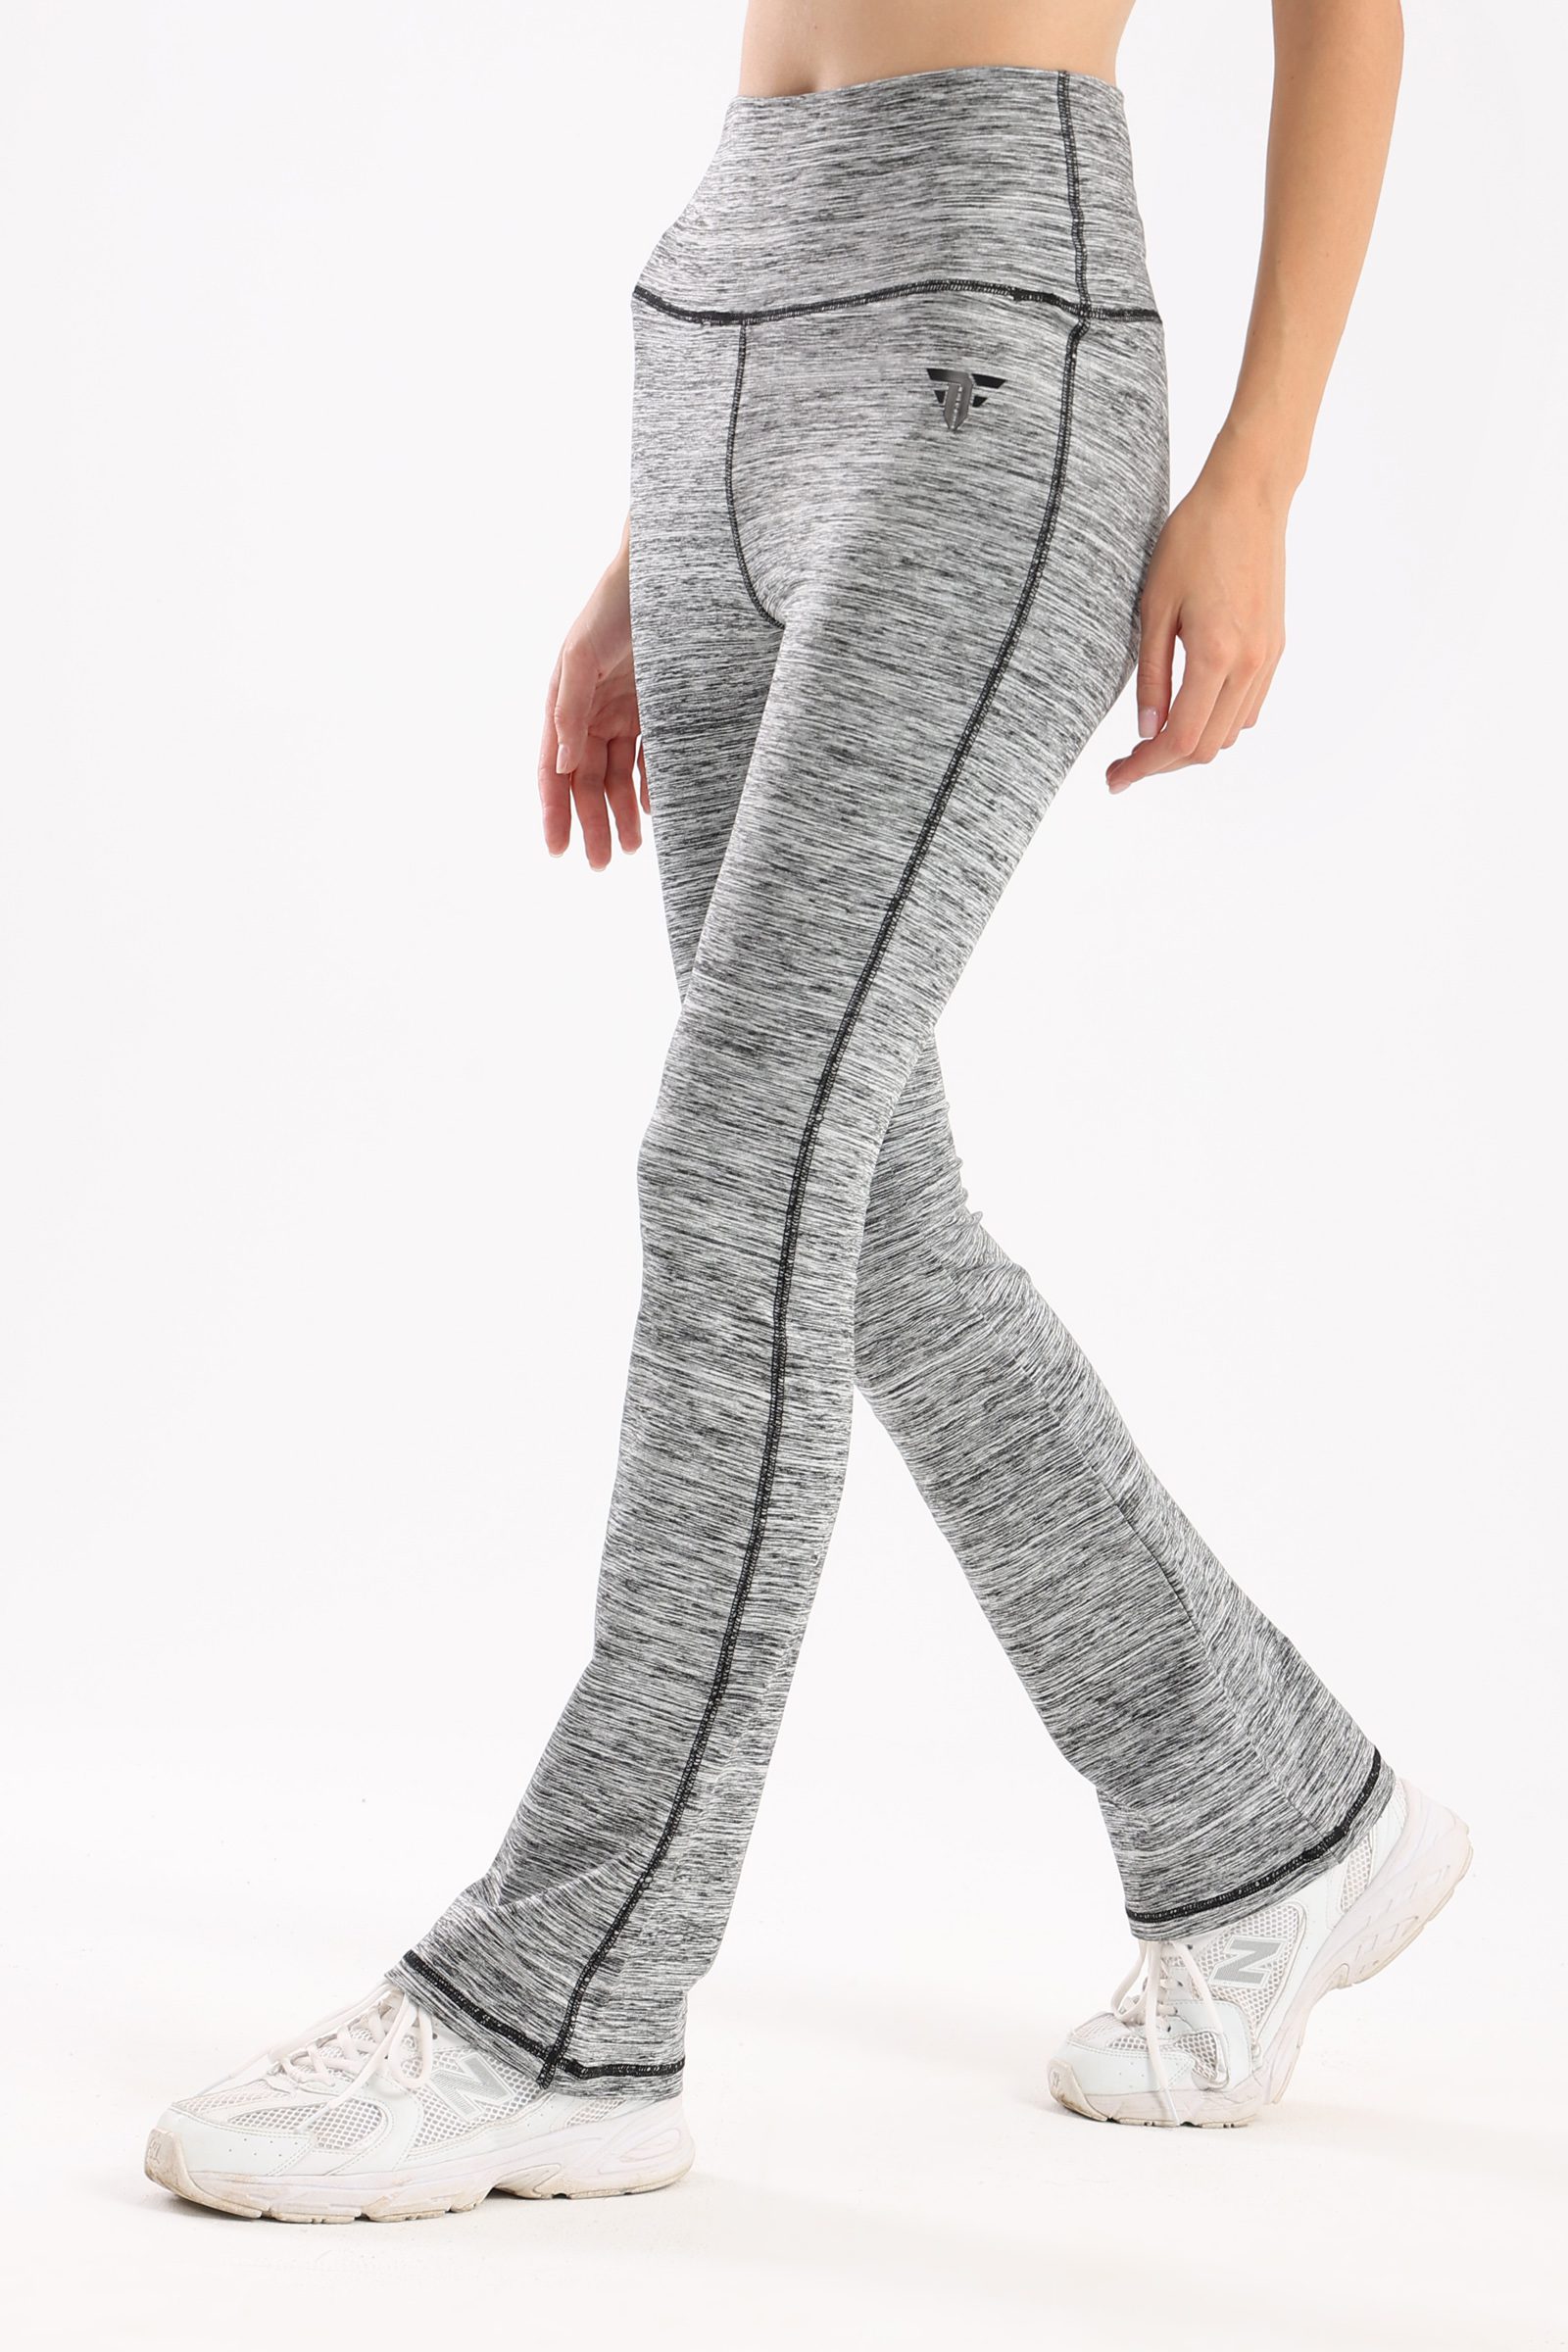 Must Have Flare Yoga Pant- Grey